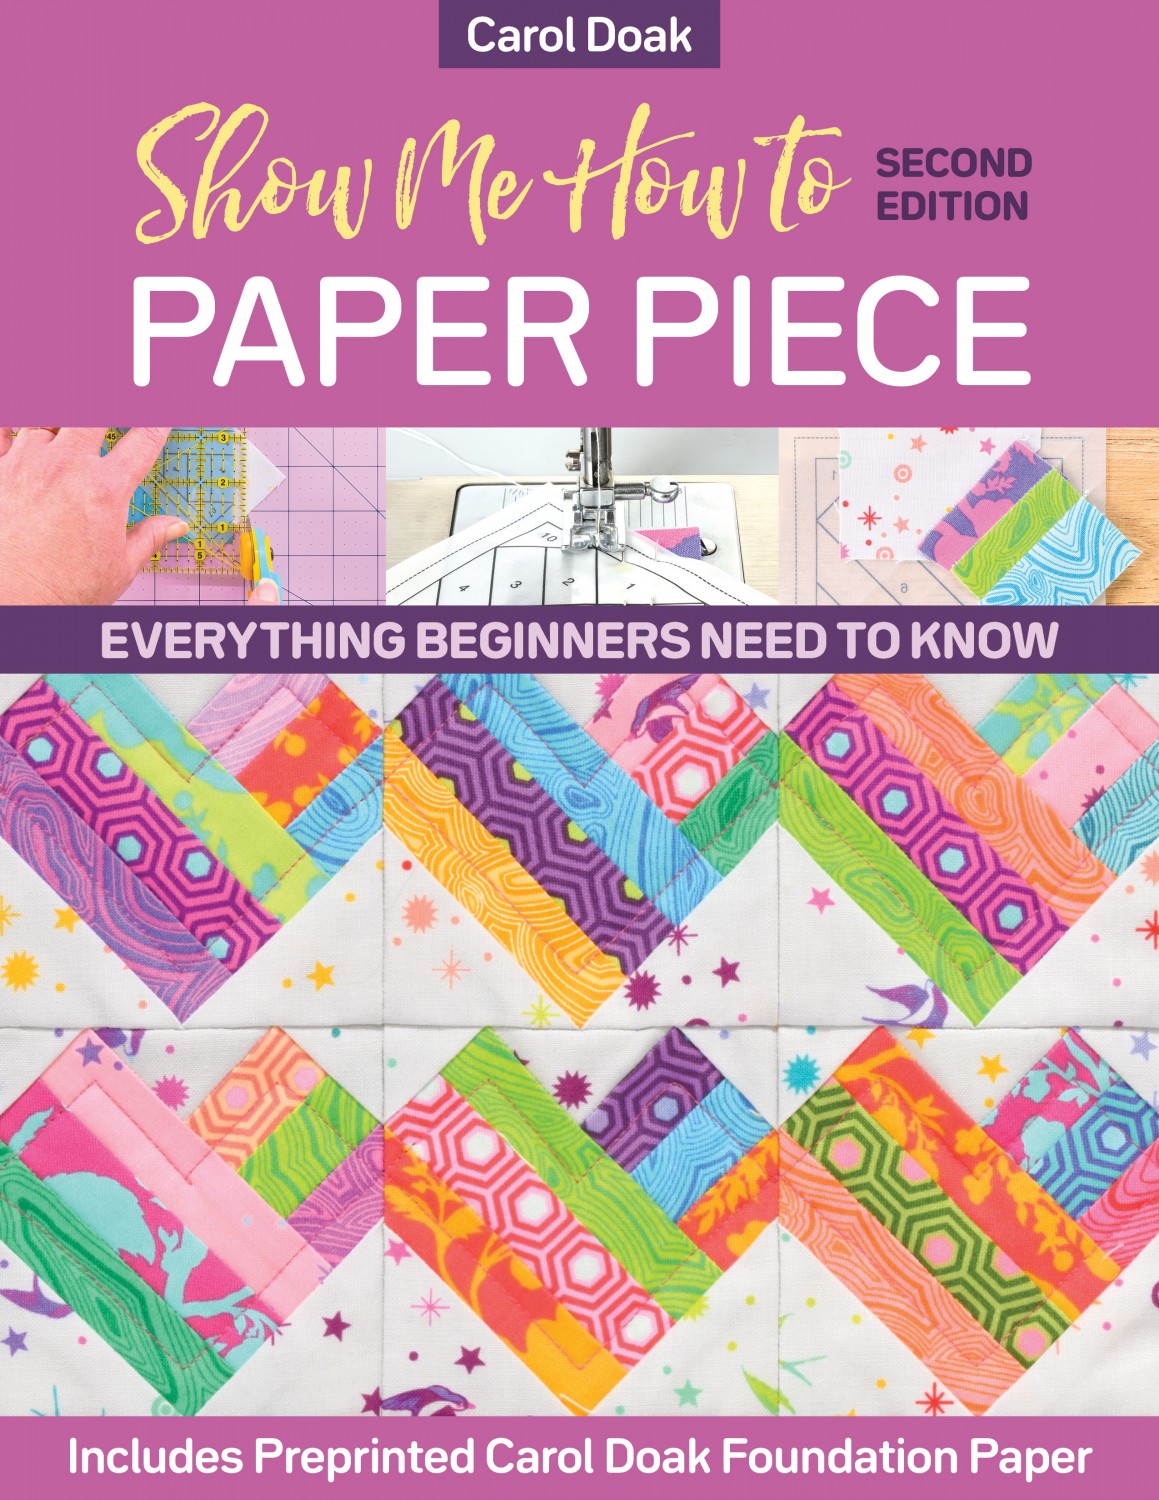 Show Me How to Paper Piece by Carol Doak's (Second Edition)